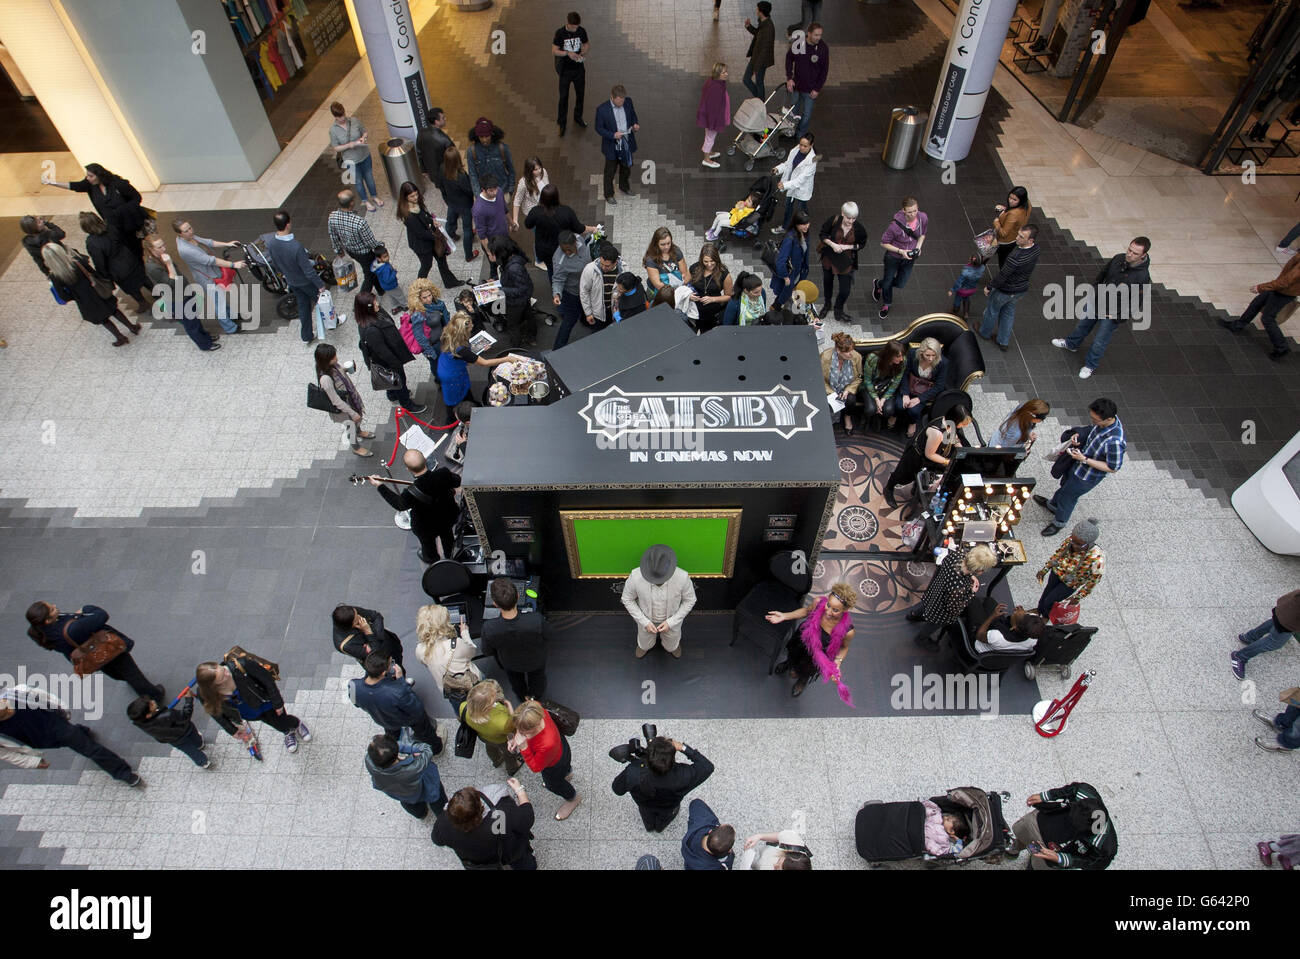 'The Great Gatsby' experience comes to Westfield London with Heatworld and RealD 3D. Westfield central London. Stock Photo